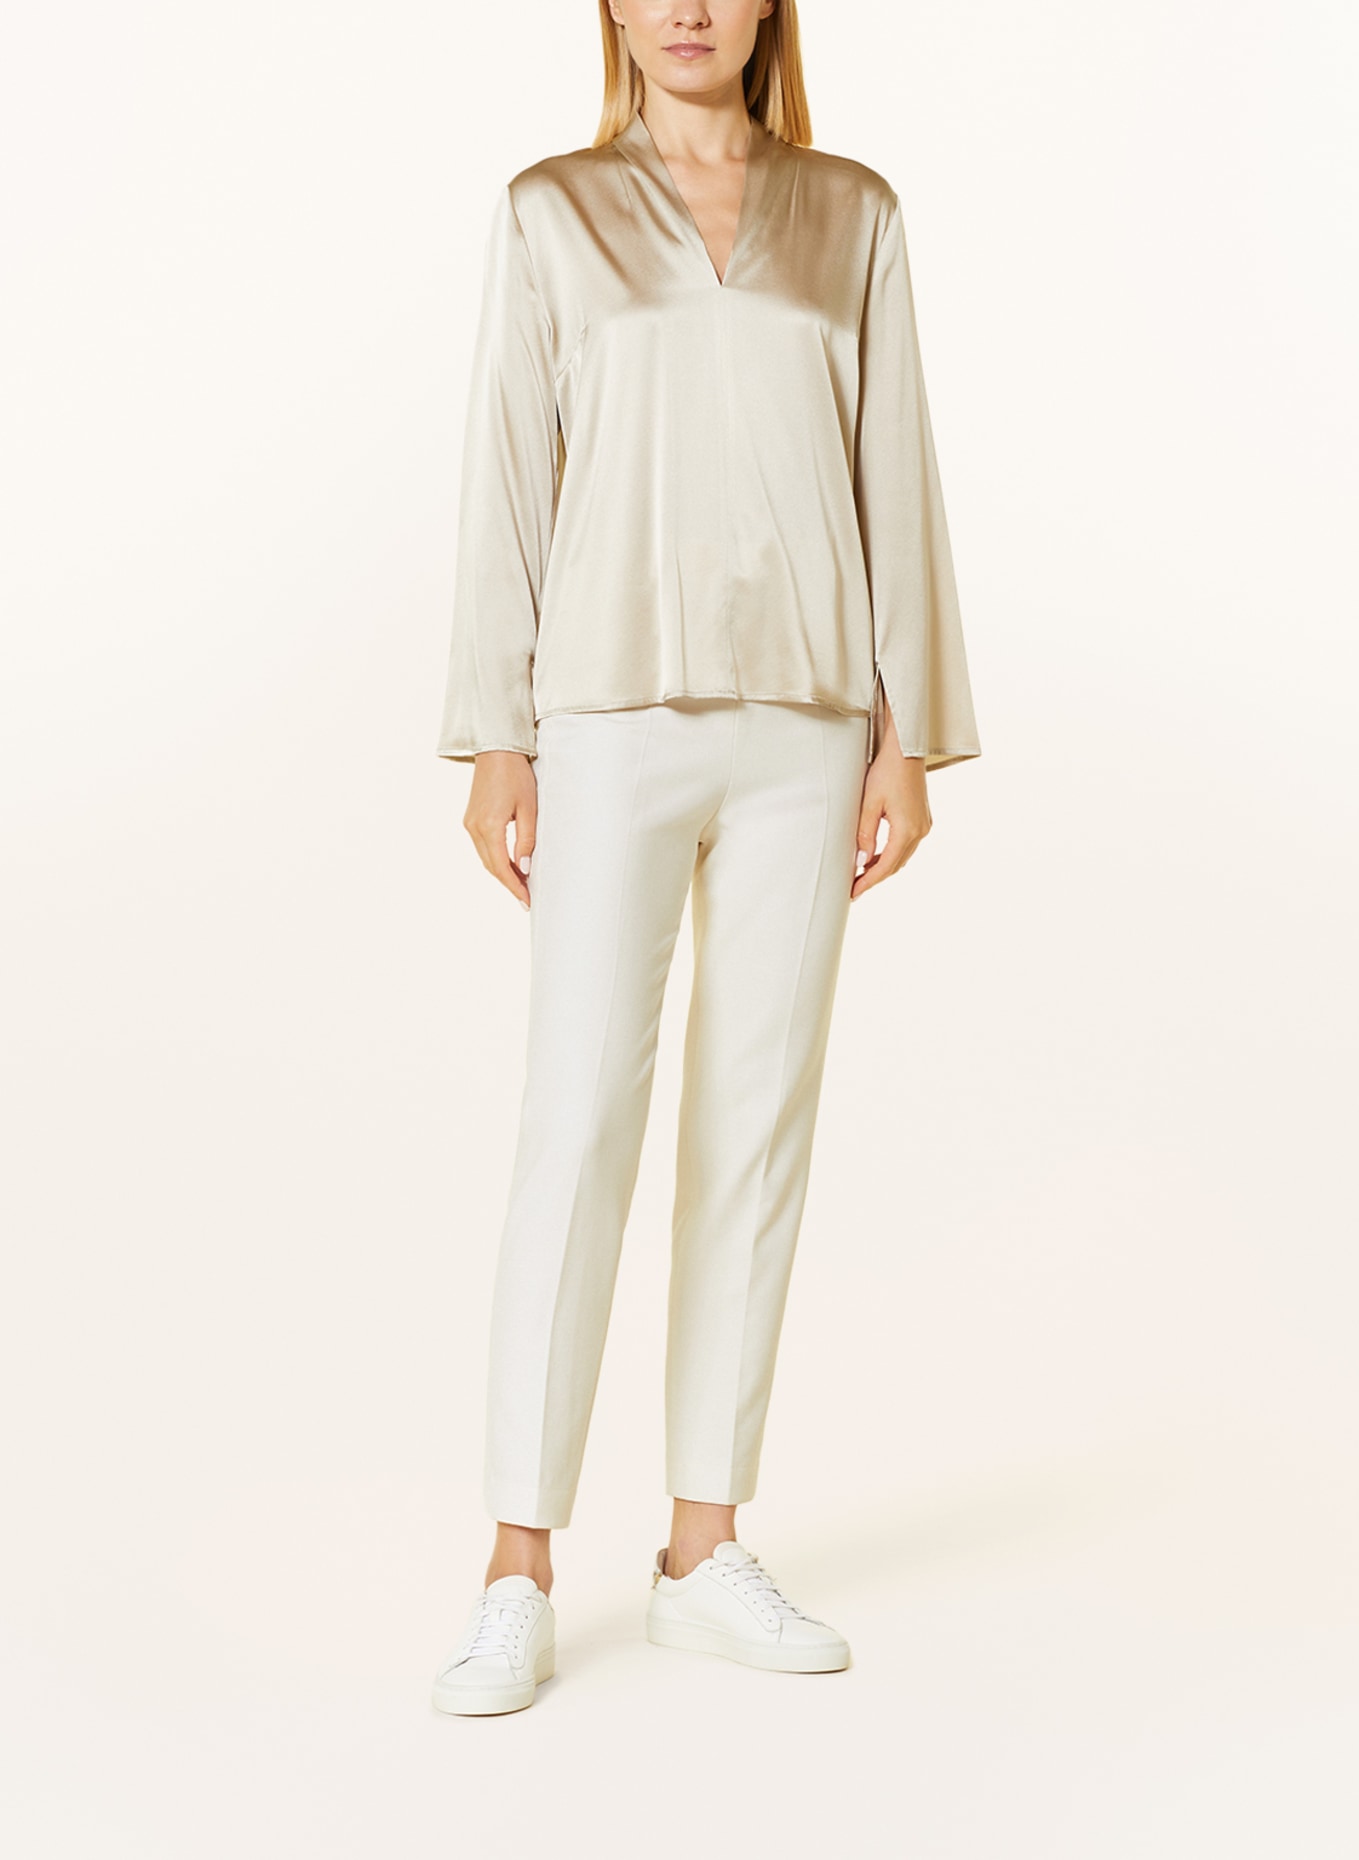 TONNO & PANNA Shirt blouse DIANE in silk, Color: TAUPE (Image 2)